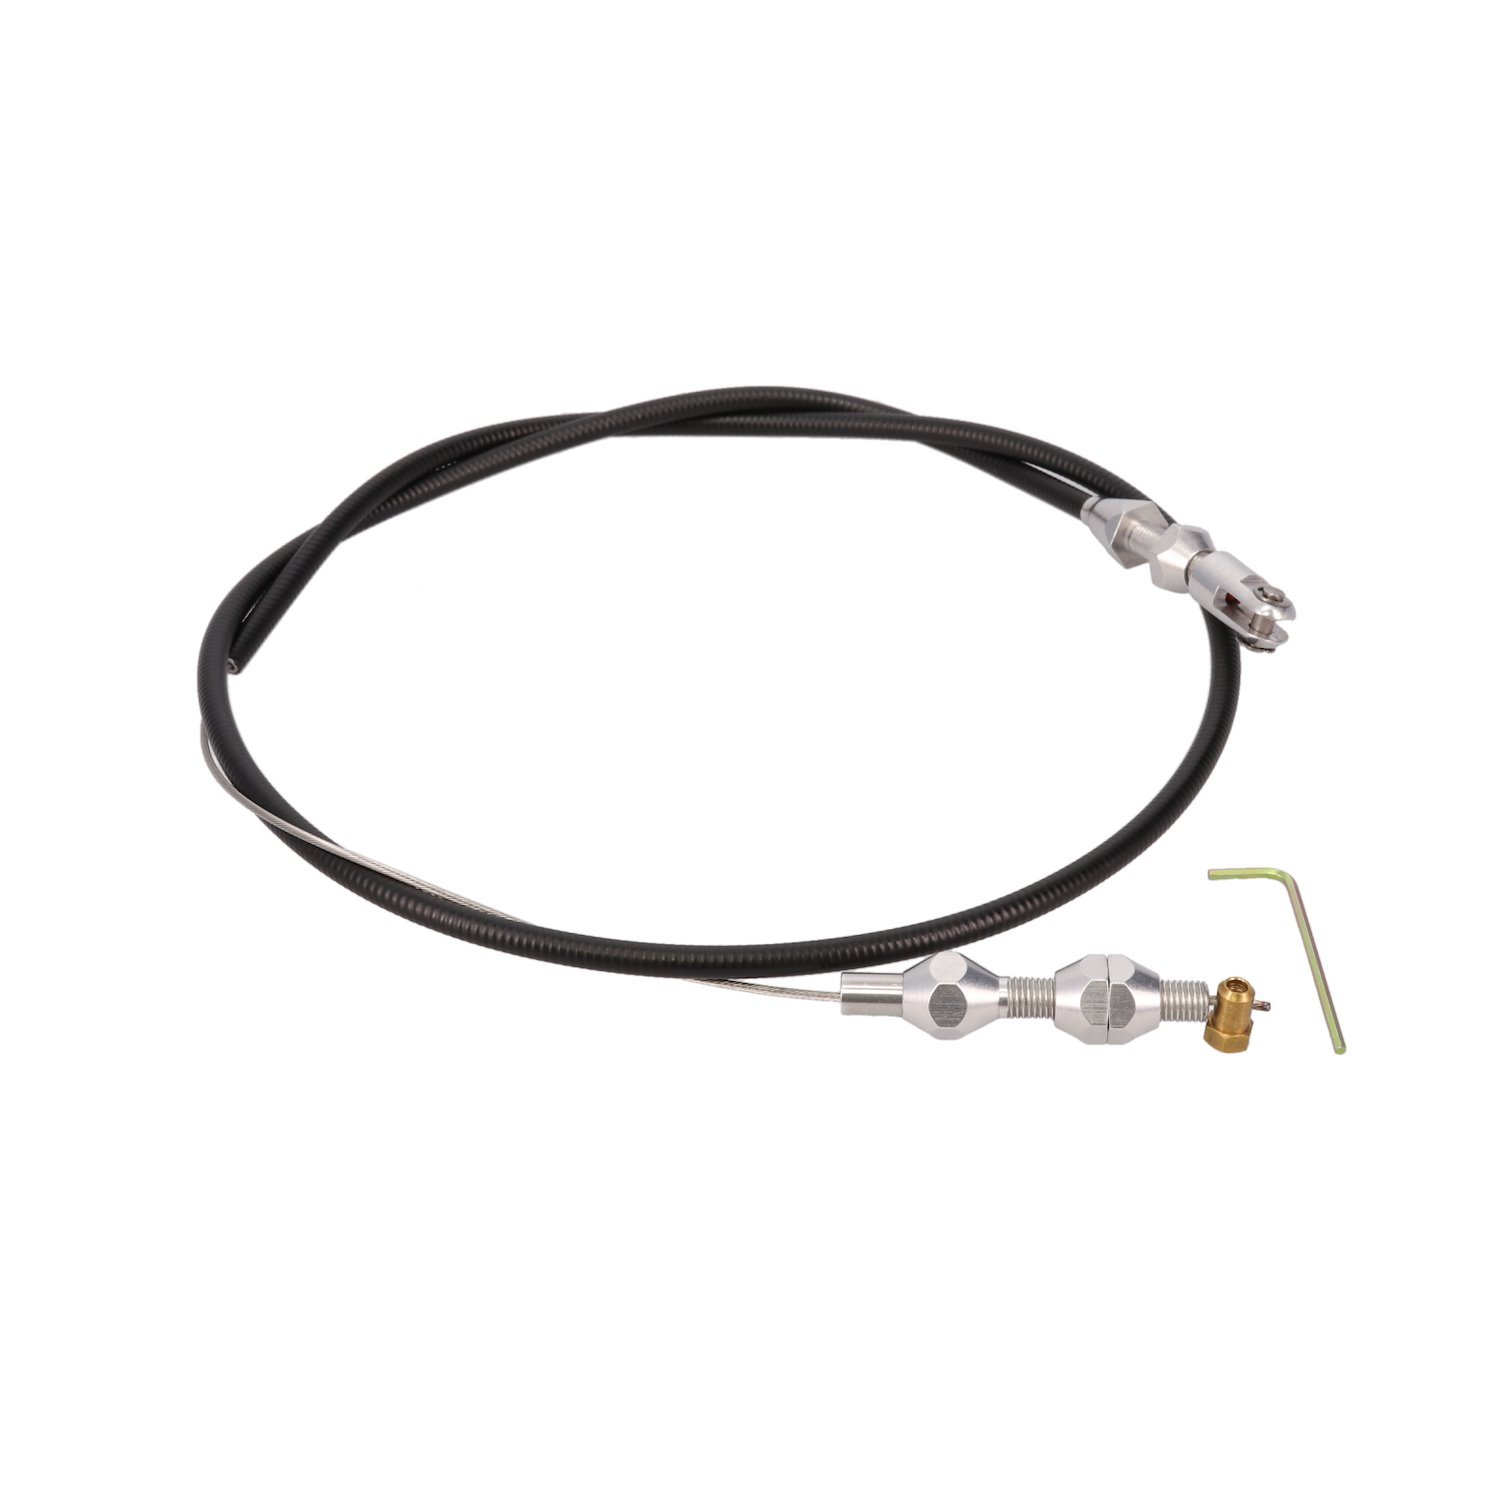 81059 Throttle Cable, LS, 36 Inch, Braided Stainless Steel